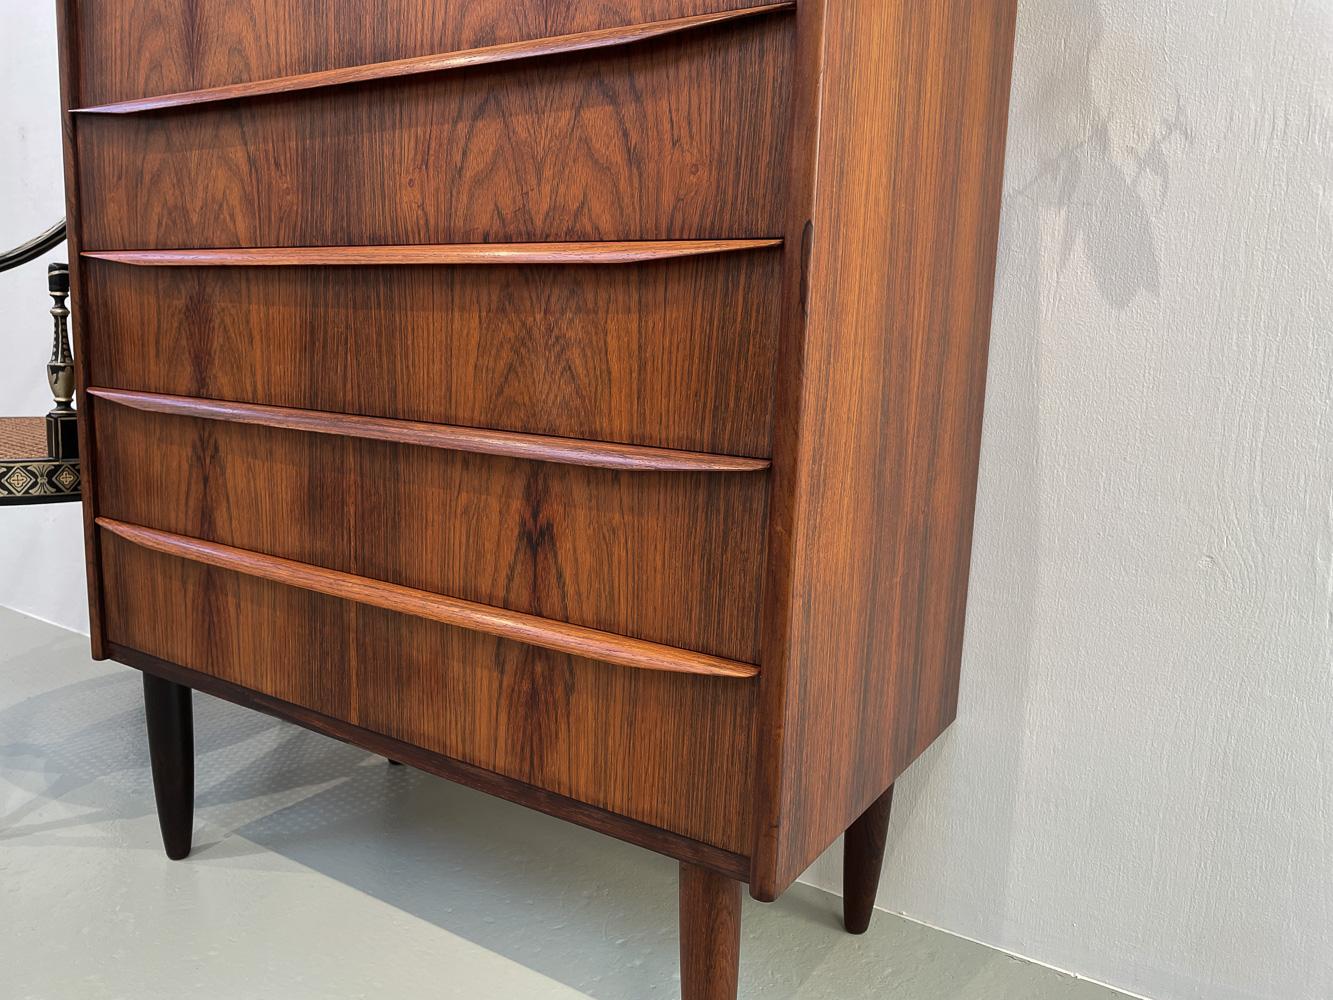 Danish Modern Rosewood/Palisander Tall Boy Dresser, 1960s.
Scandinavian Mid-Century Modern tall chest of drawers made in Denmark in the 1960s.
Classic six drawer dresser also known as a Tallboy on round tapered legs i solid rosewood. Full width